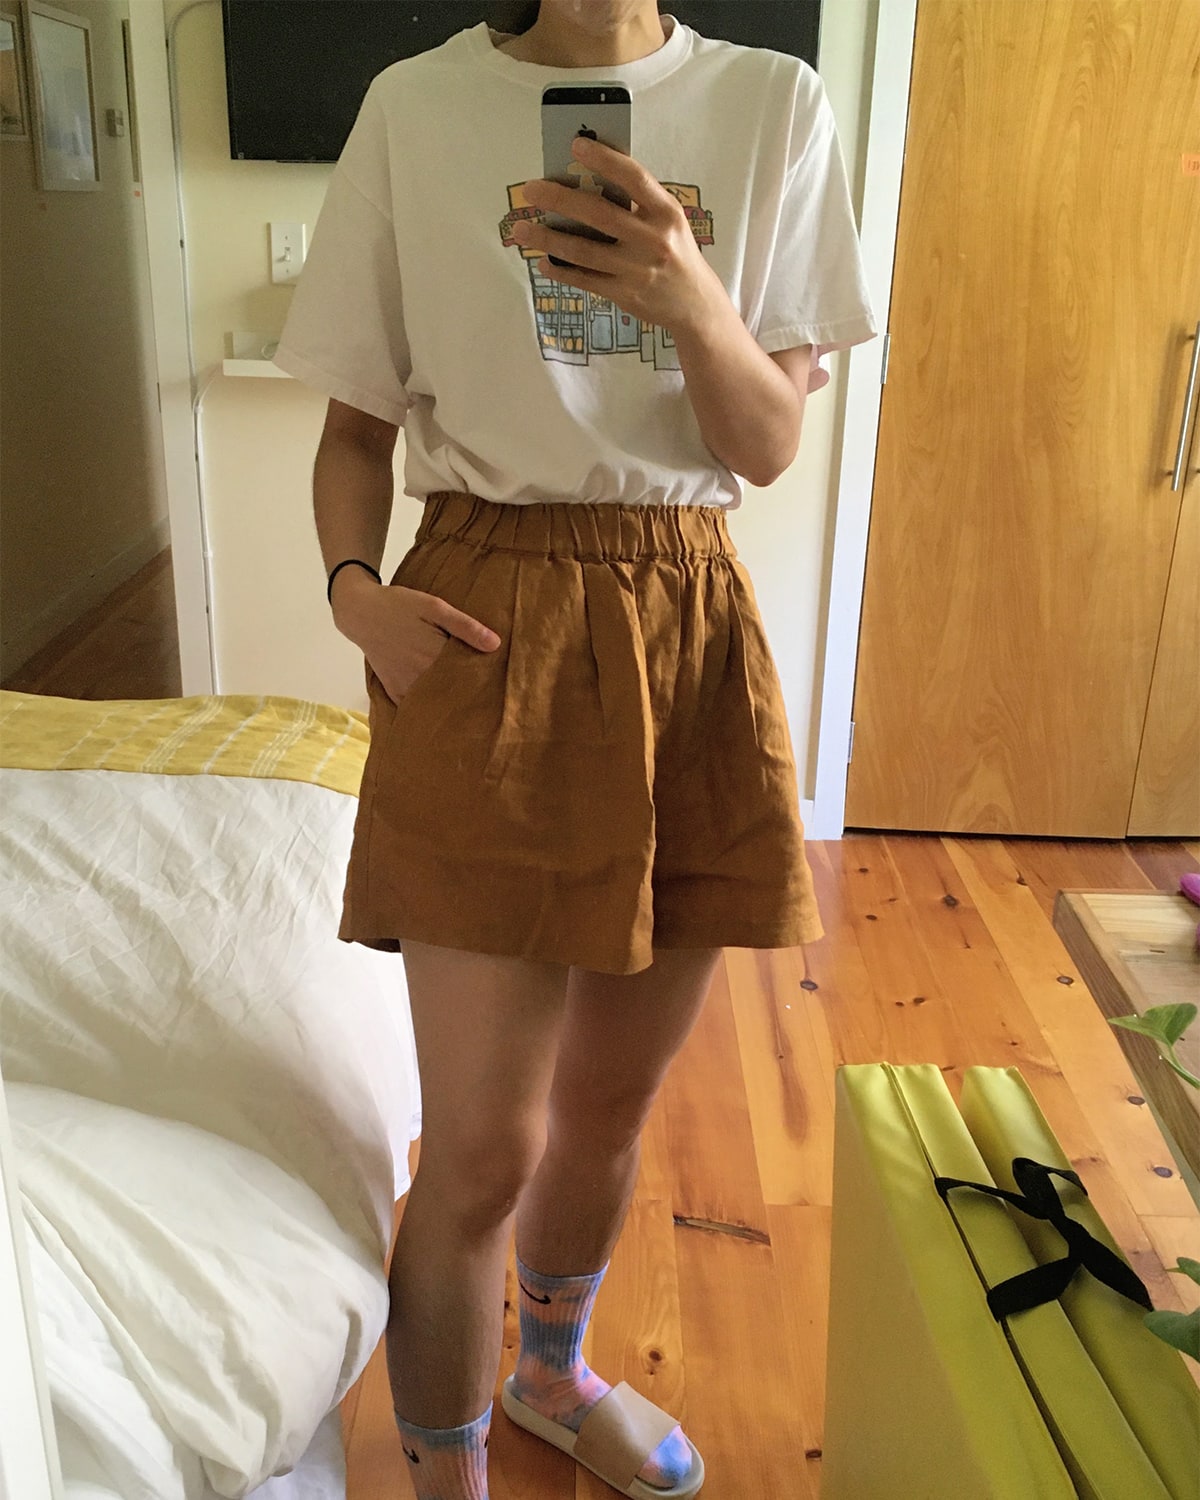 A photo of me standing in front of our mirror. I’m wearing a tee shirt I got from Yafa cafe and a new pair of shorts, also bought on Etsy. The shorts are a dark brownish mustard color, and they come up the waist pretty high. They have POCKETS (in all caps) as you can see I have my hand in one.